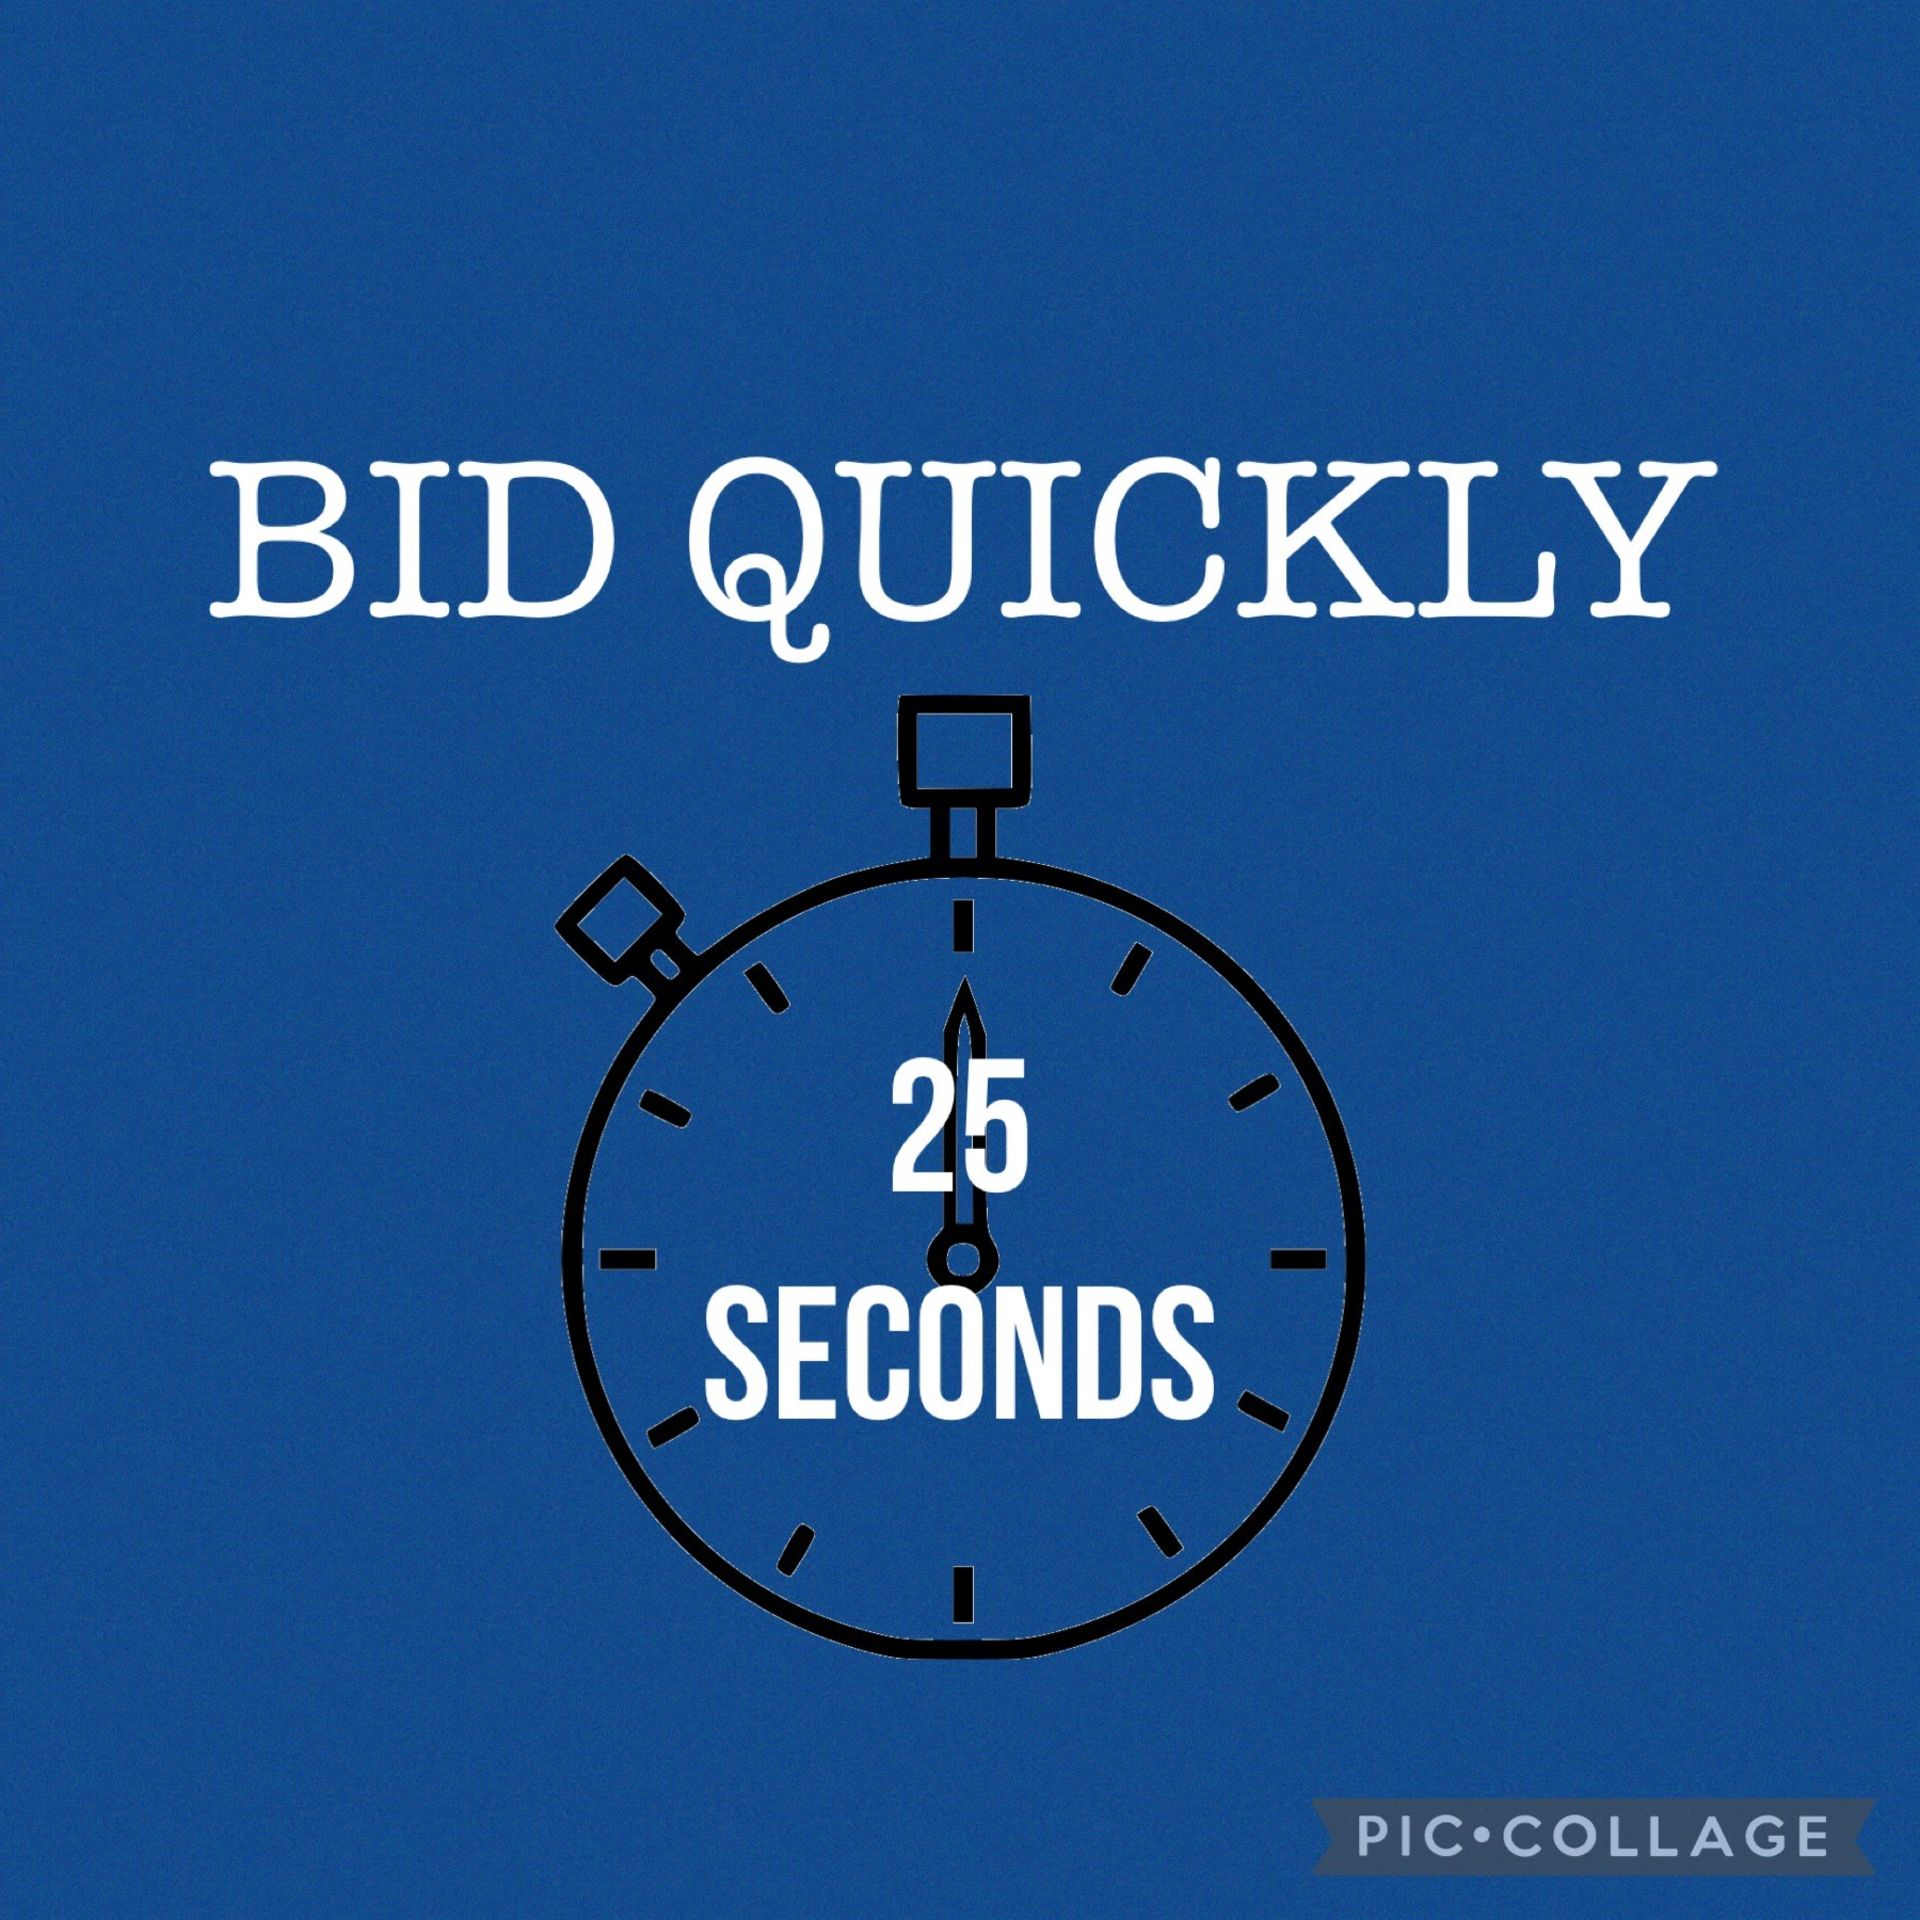 BID QUICKLY, LOTS WILL BE ENDING EVERY 25 SECONDS AT THIS AUCTION!